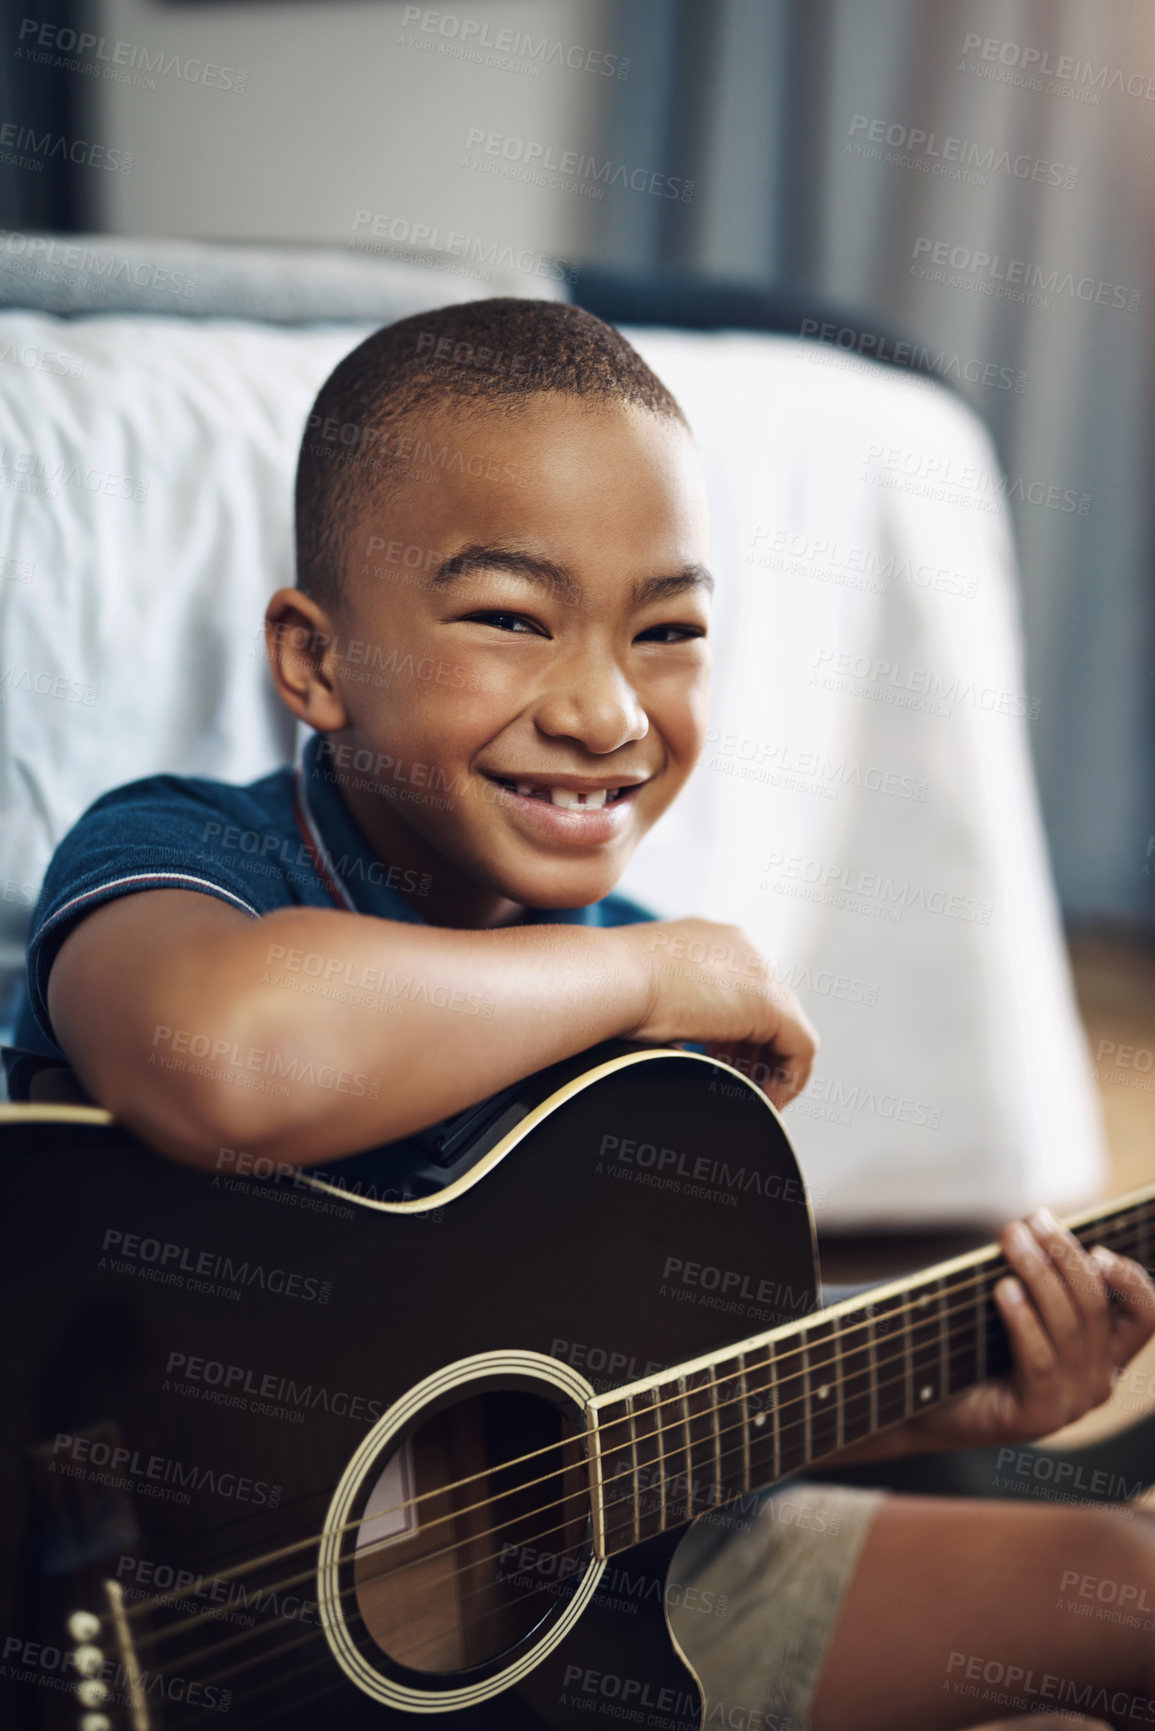 Buy stock photo Shot of a young boy playing the guitar at home